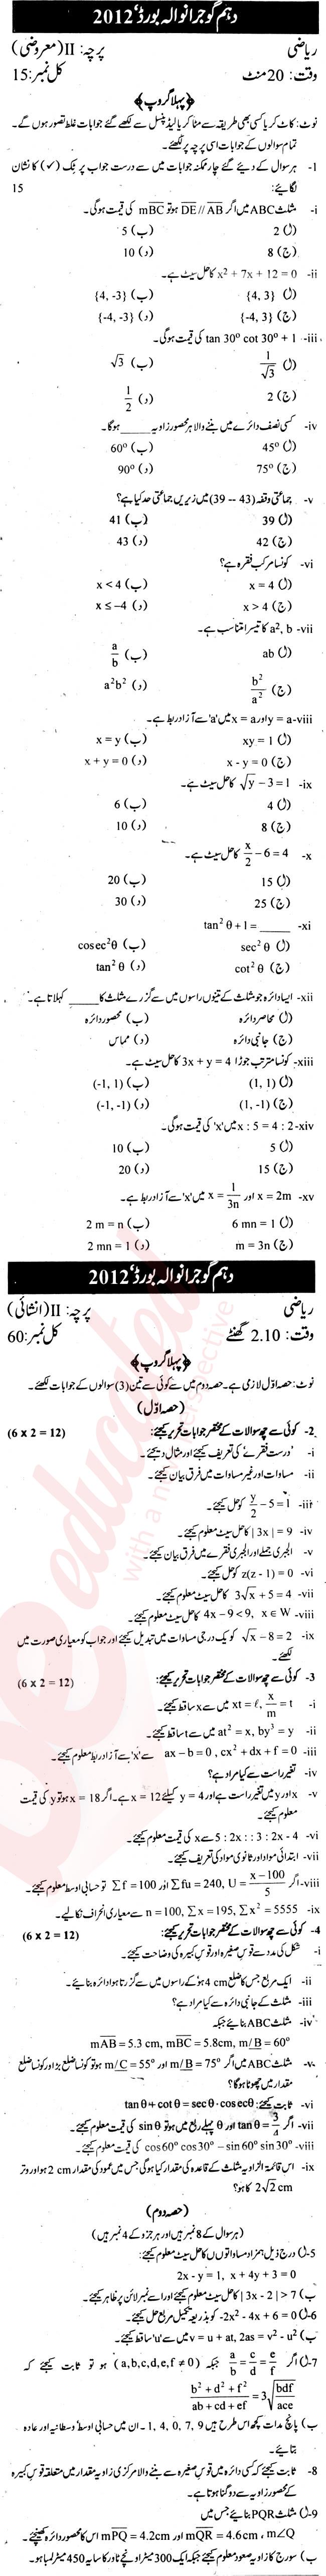 Math 10th class Past Paper Group 1 BISE Gujranwala 2012